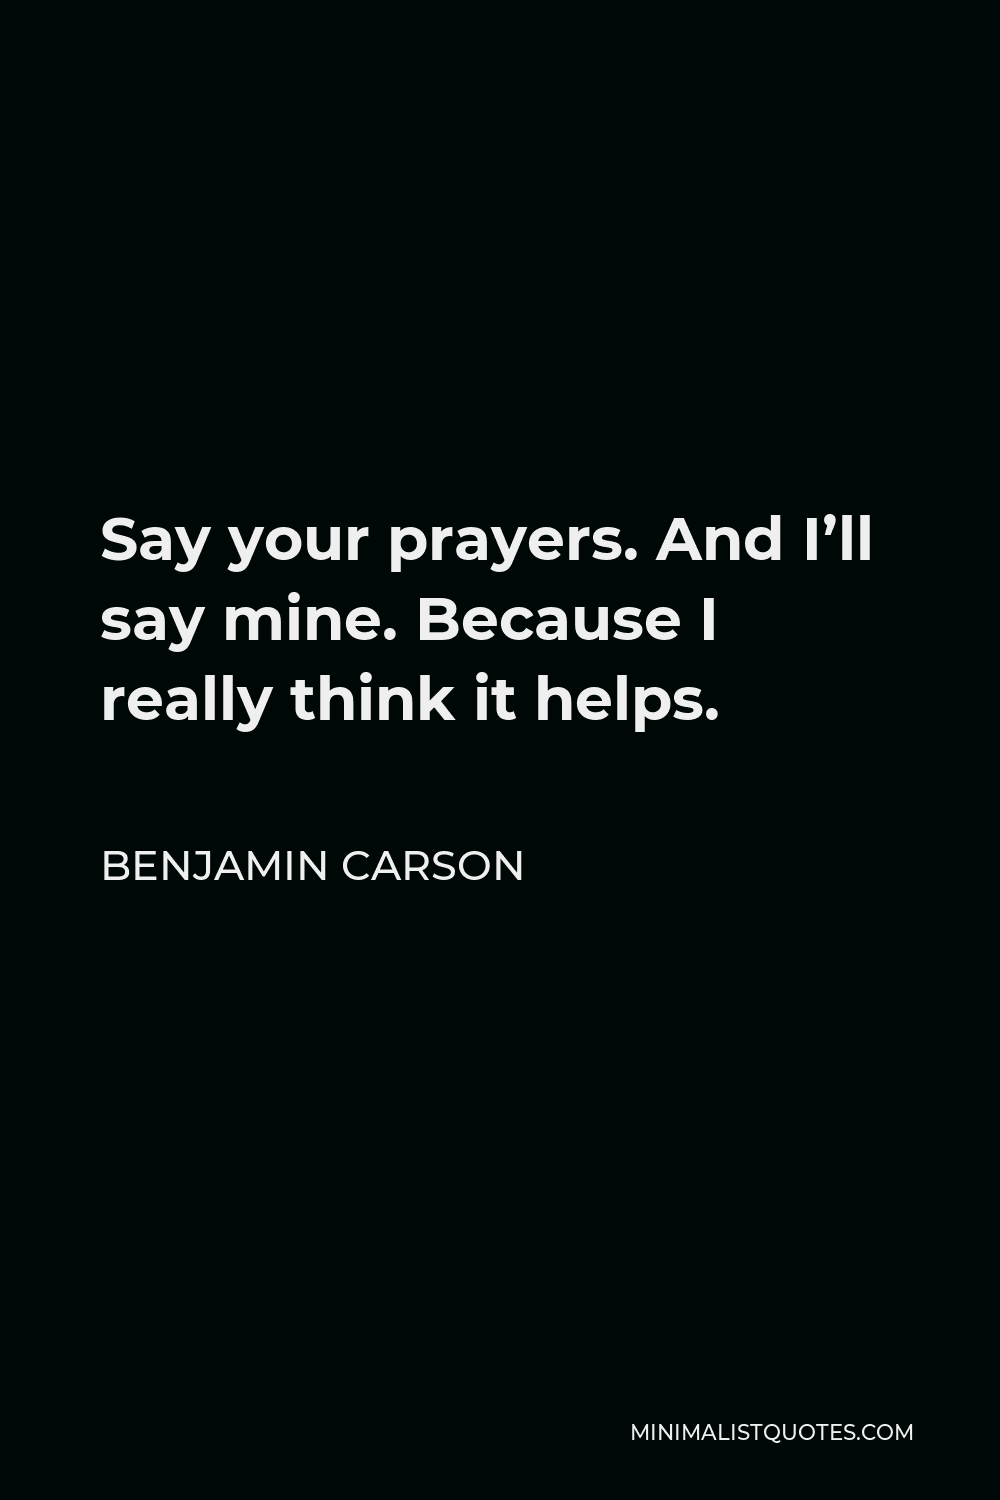 Benjamin Carson Quote - Say your prayers. And I’ll say mine. Because I really think it helps.